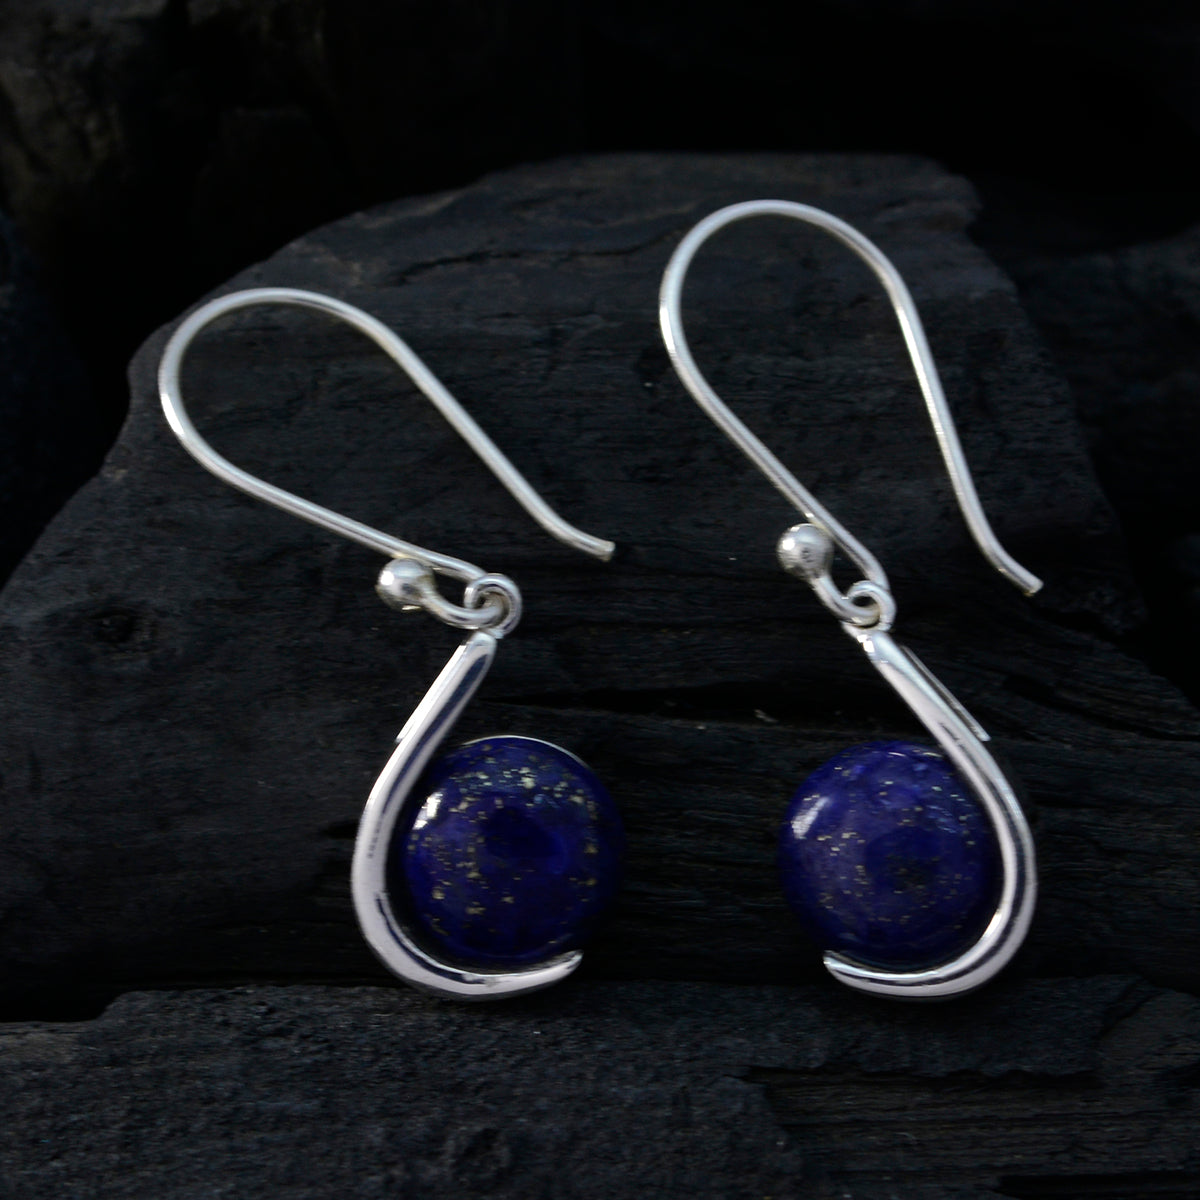 Riyo Good Gemstones round Cabochon Nevy Blue Lapis Lazuli Silver Earrings gift for mother